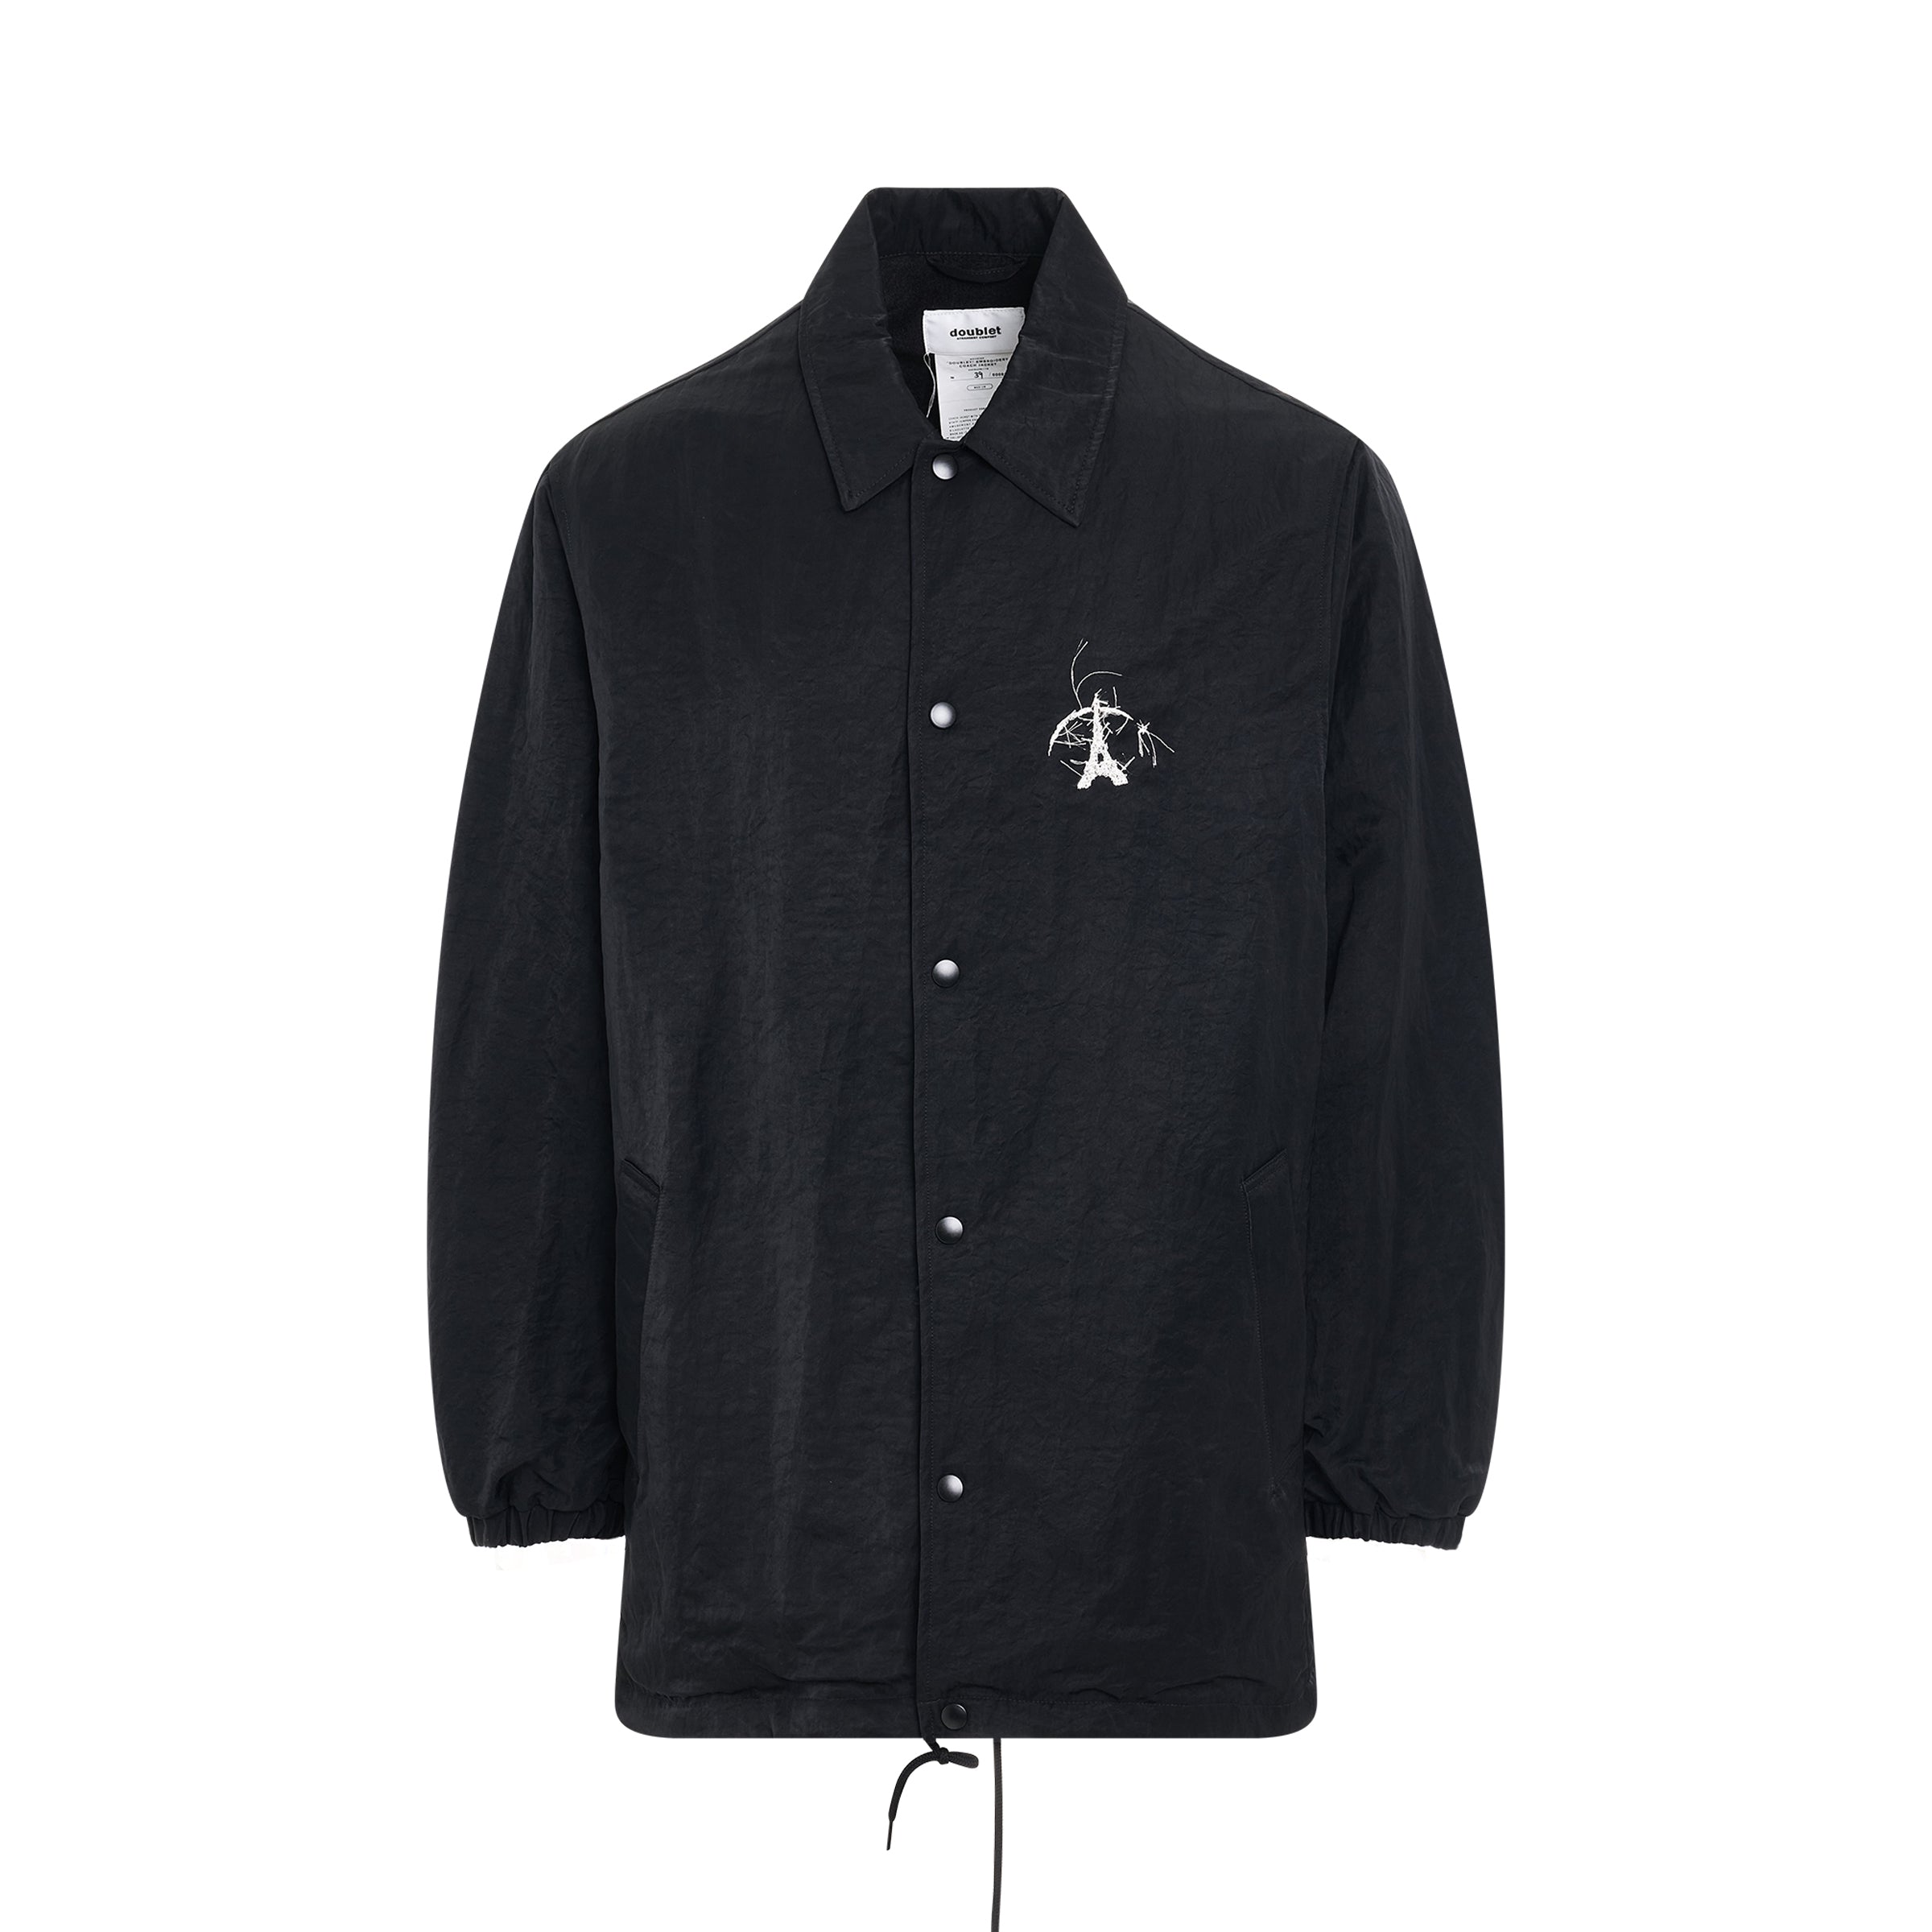 "DOUBLAND" Embroidery Coach Jacket in Black